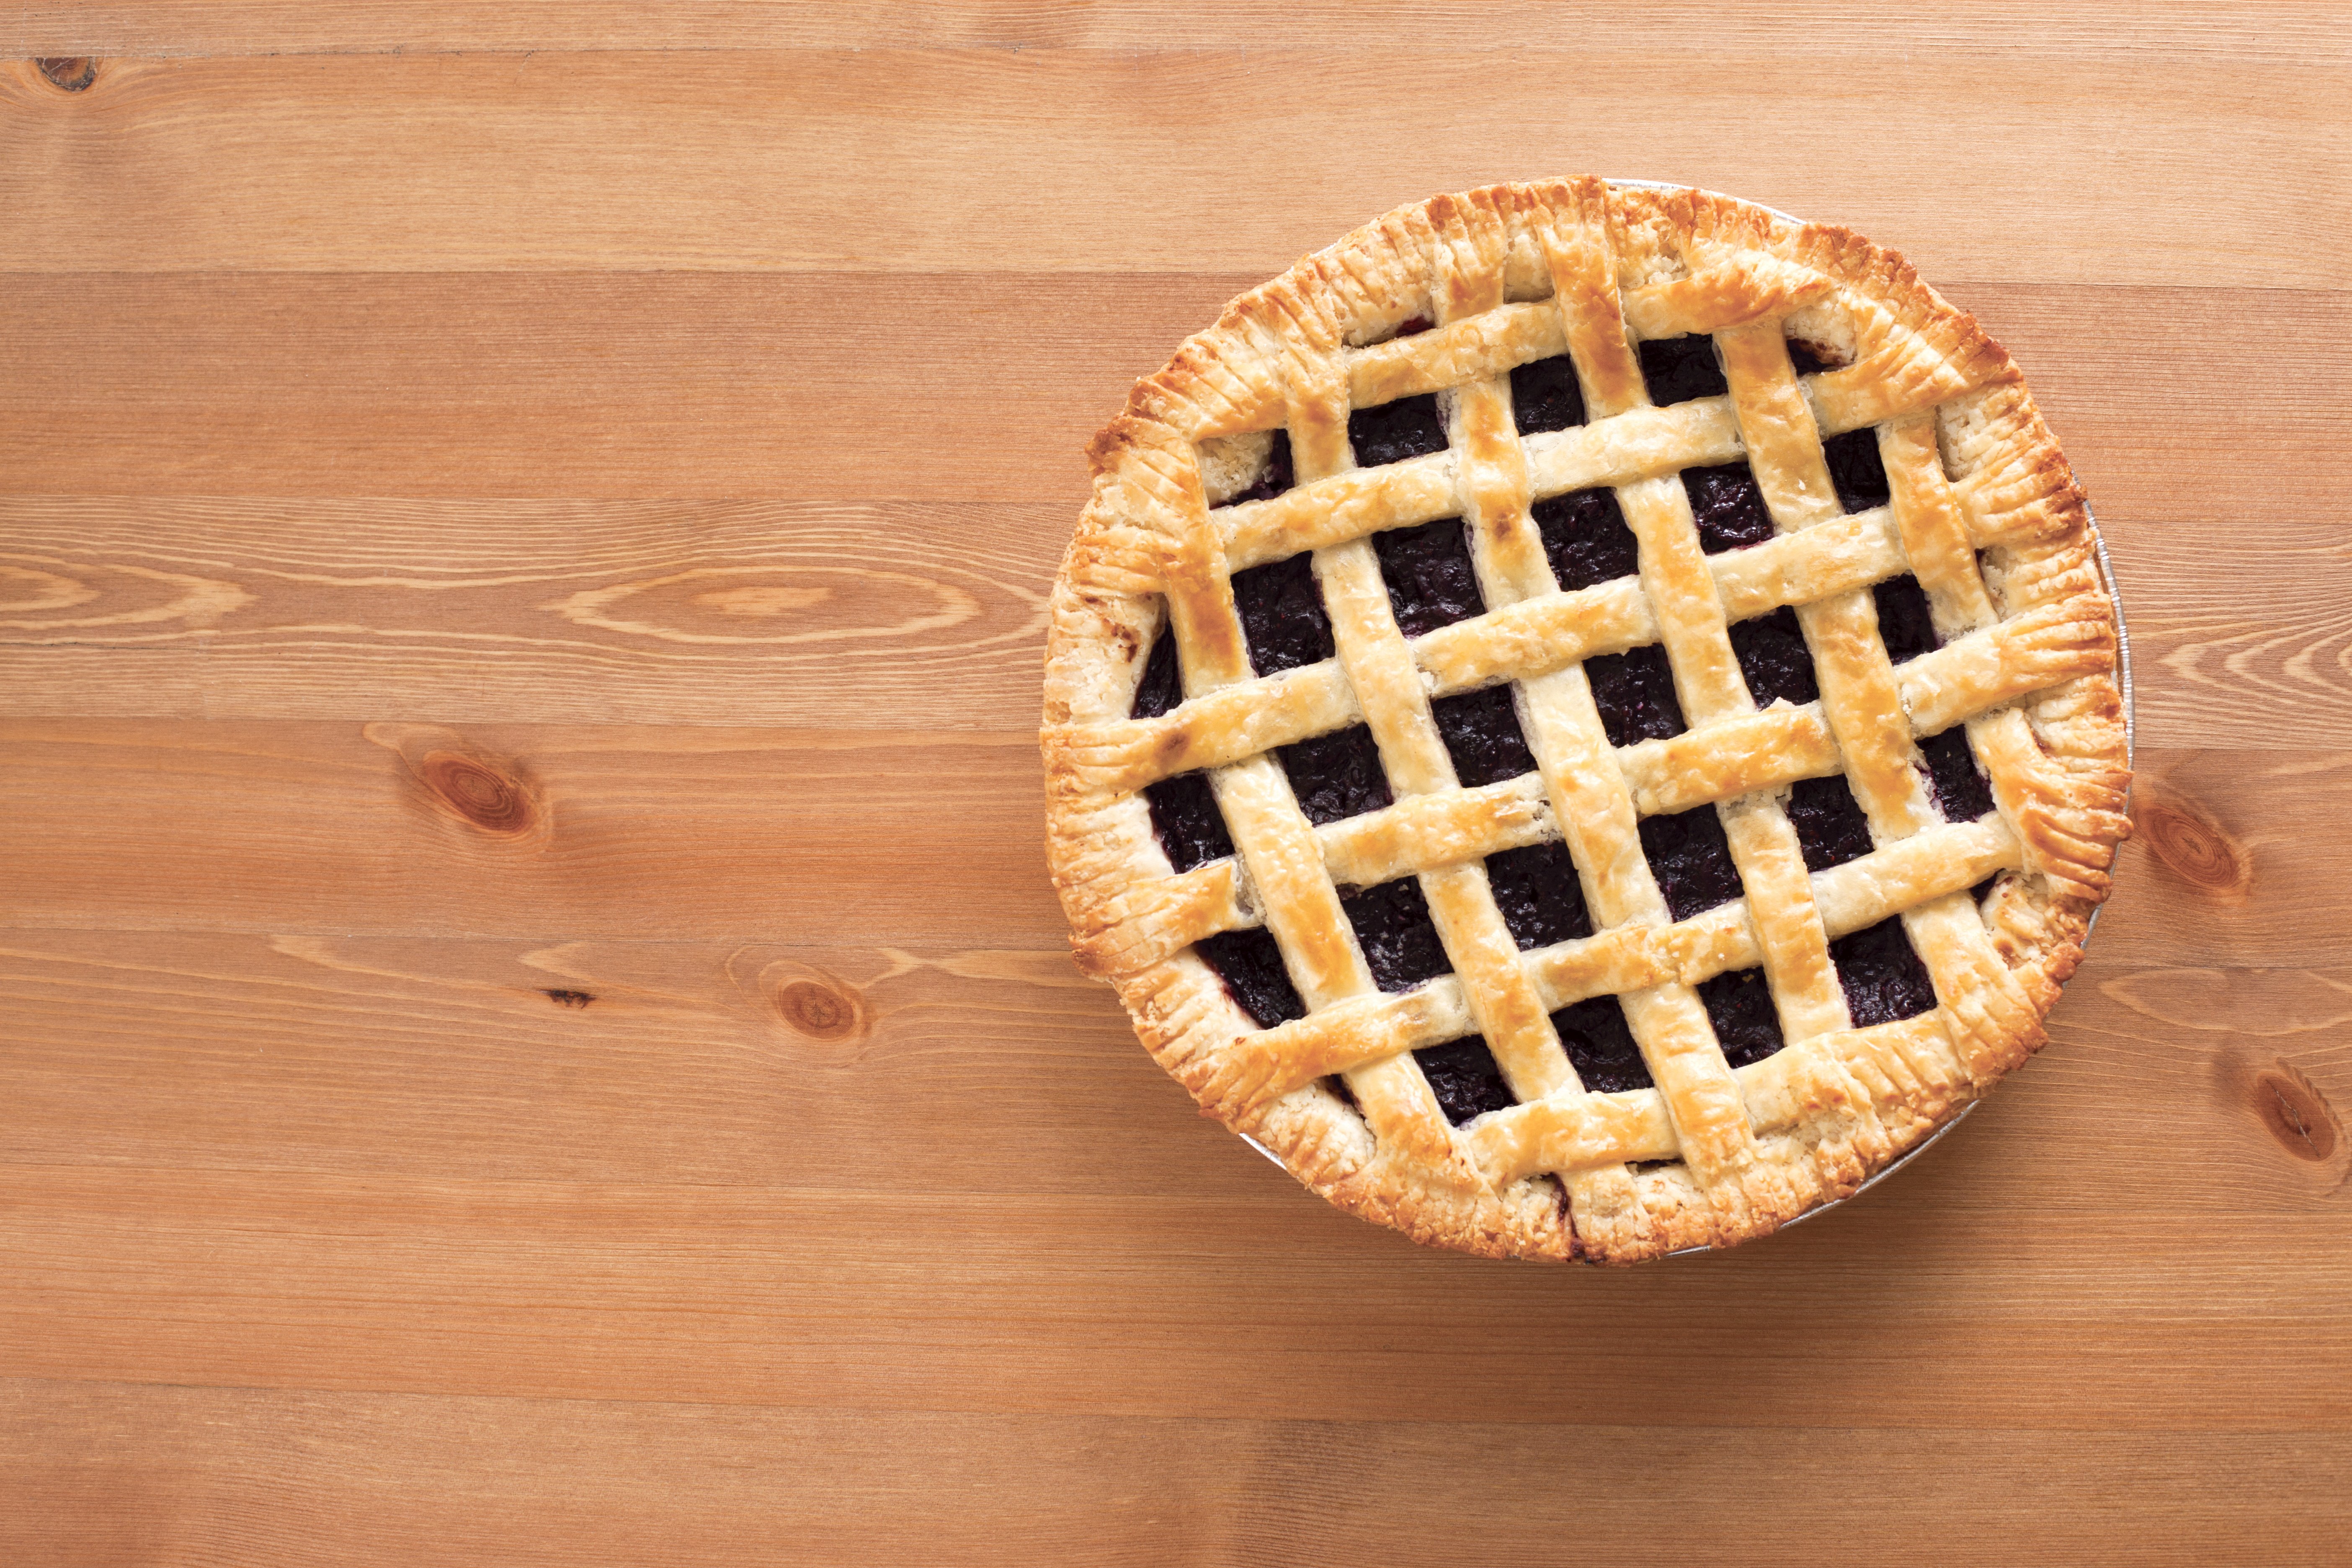 A freshly baked pie on a wooden countertop.